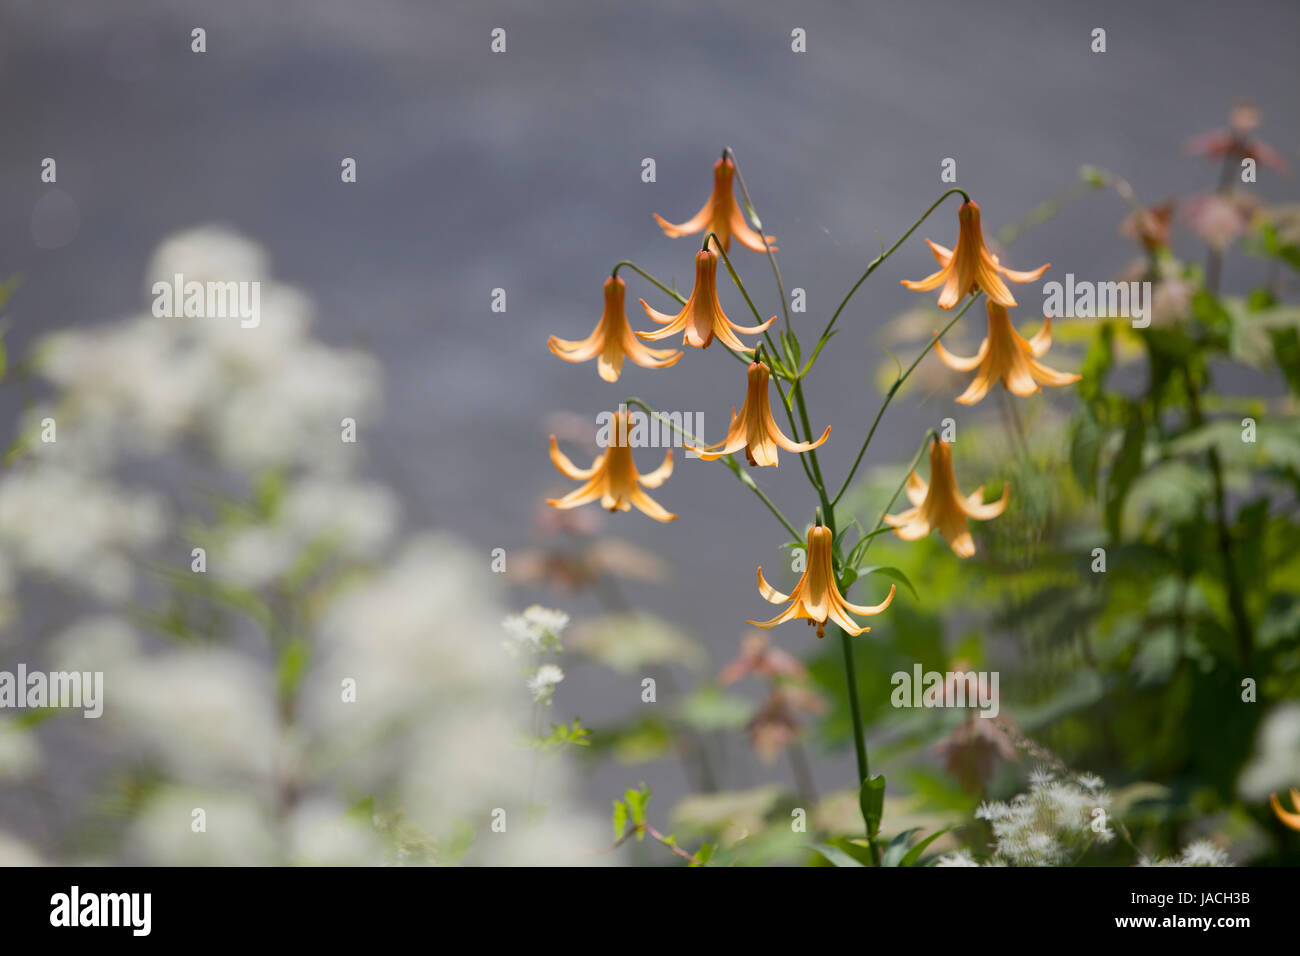 Wild tiger lilies by the lake. Isolated on a blurry background. Stock Photo